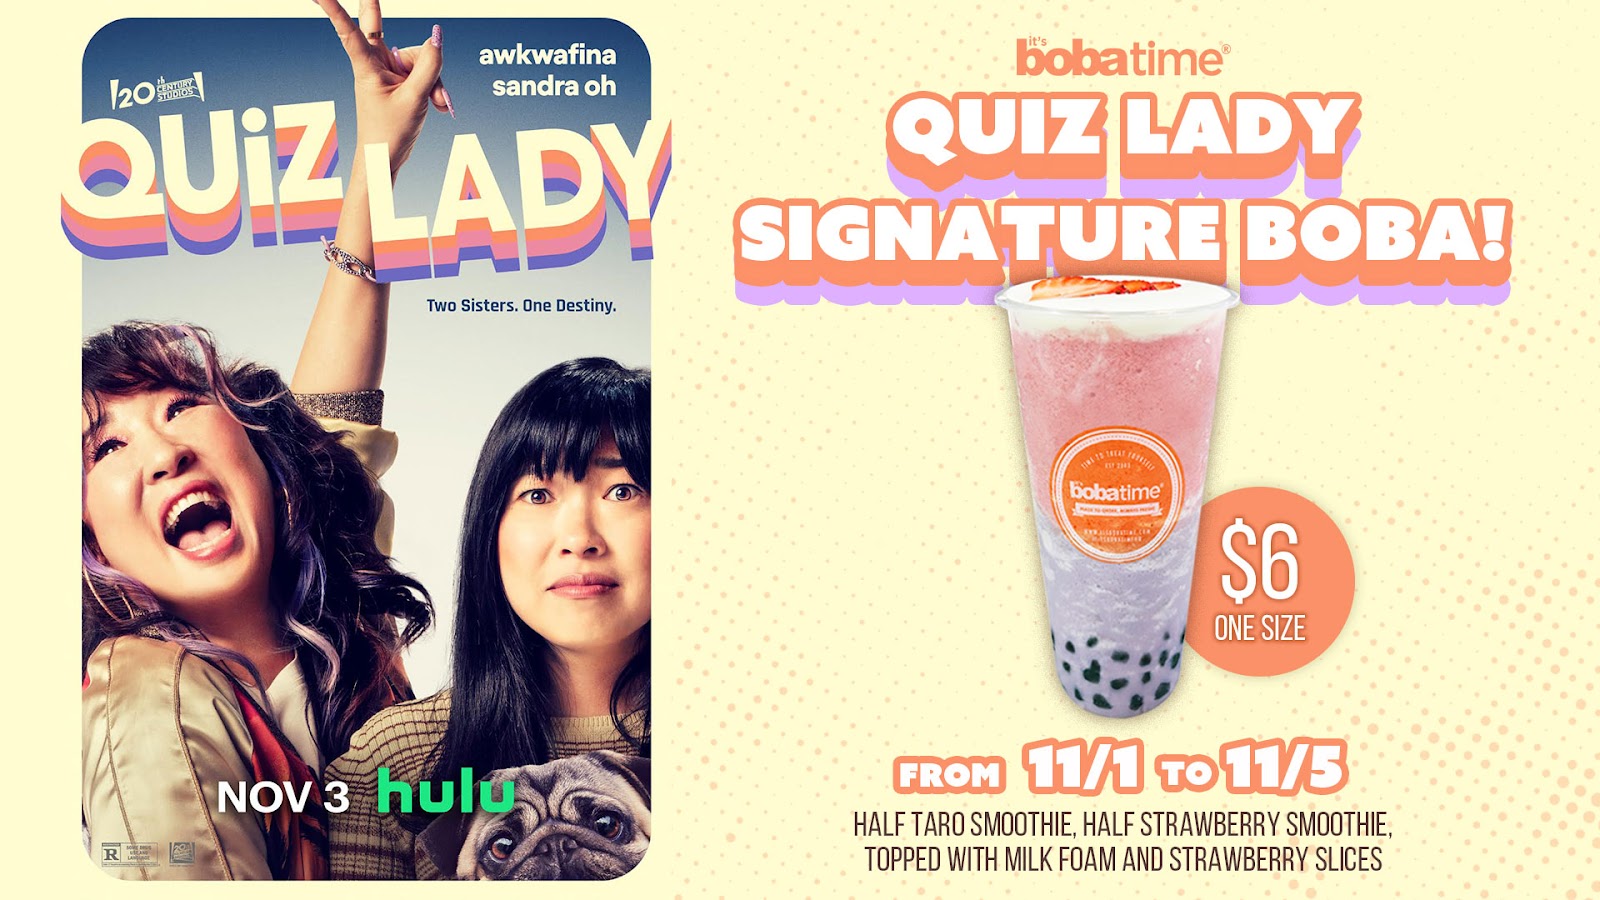 It’s Boba Time Is Giving Away Free Boba In Collaboration With “Quiz Lady”